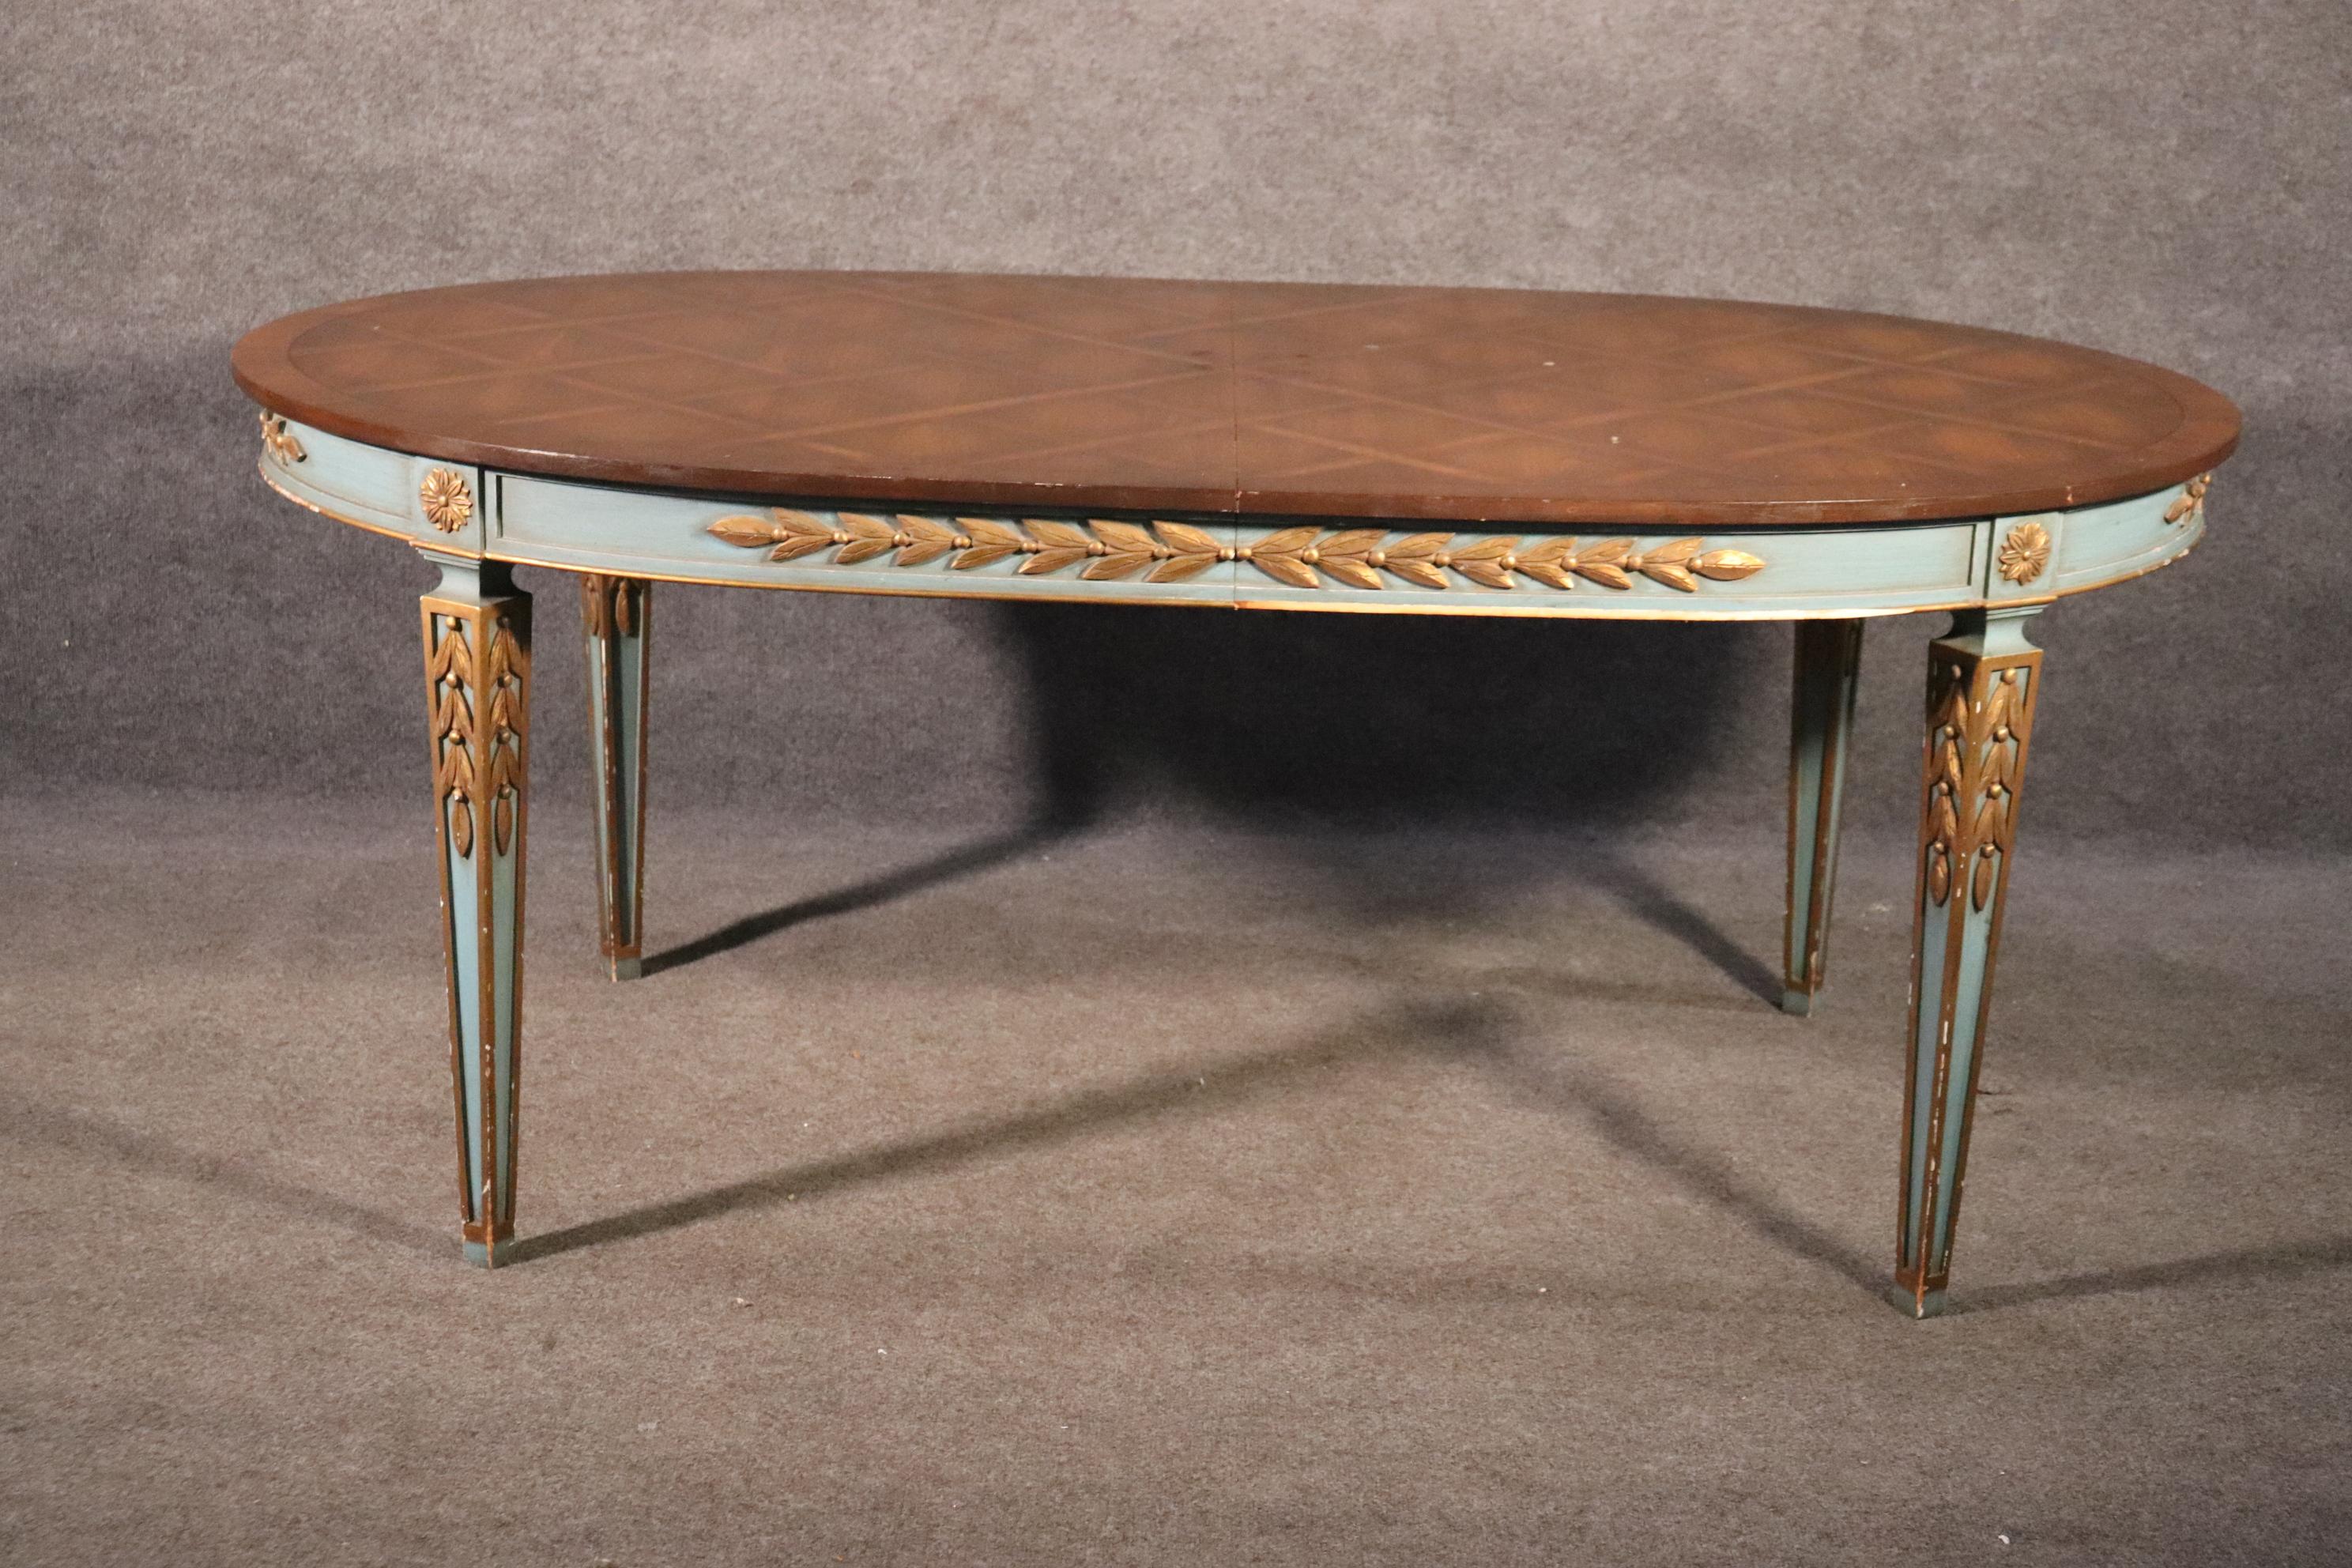 This is a beautiful blue and gold gilded dining table in the Directoire style with a gorgeous parquet top. The table features incredible lines and a gorgeous color scheme. The table is in good condition and dates to the 1950s era. The table measures